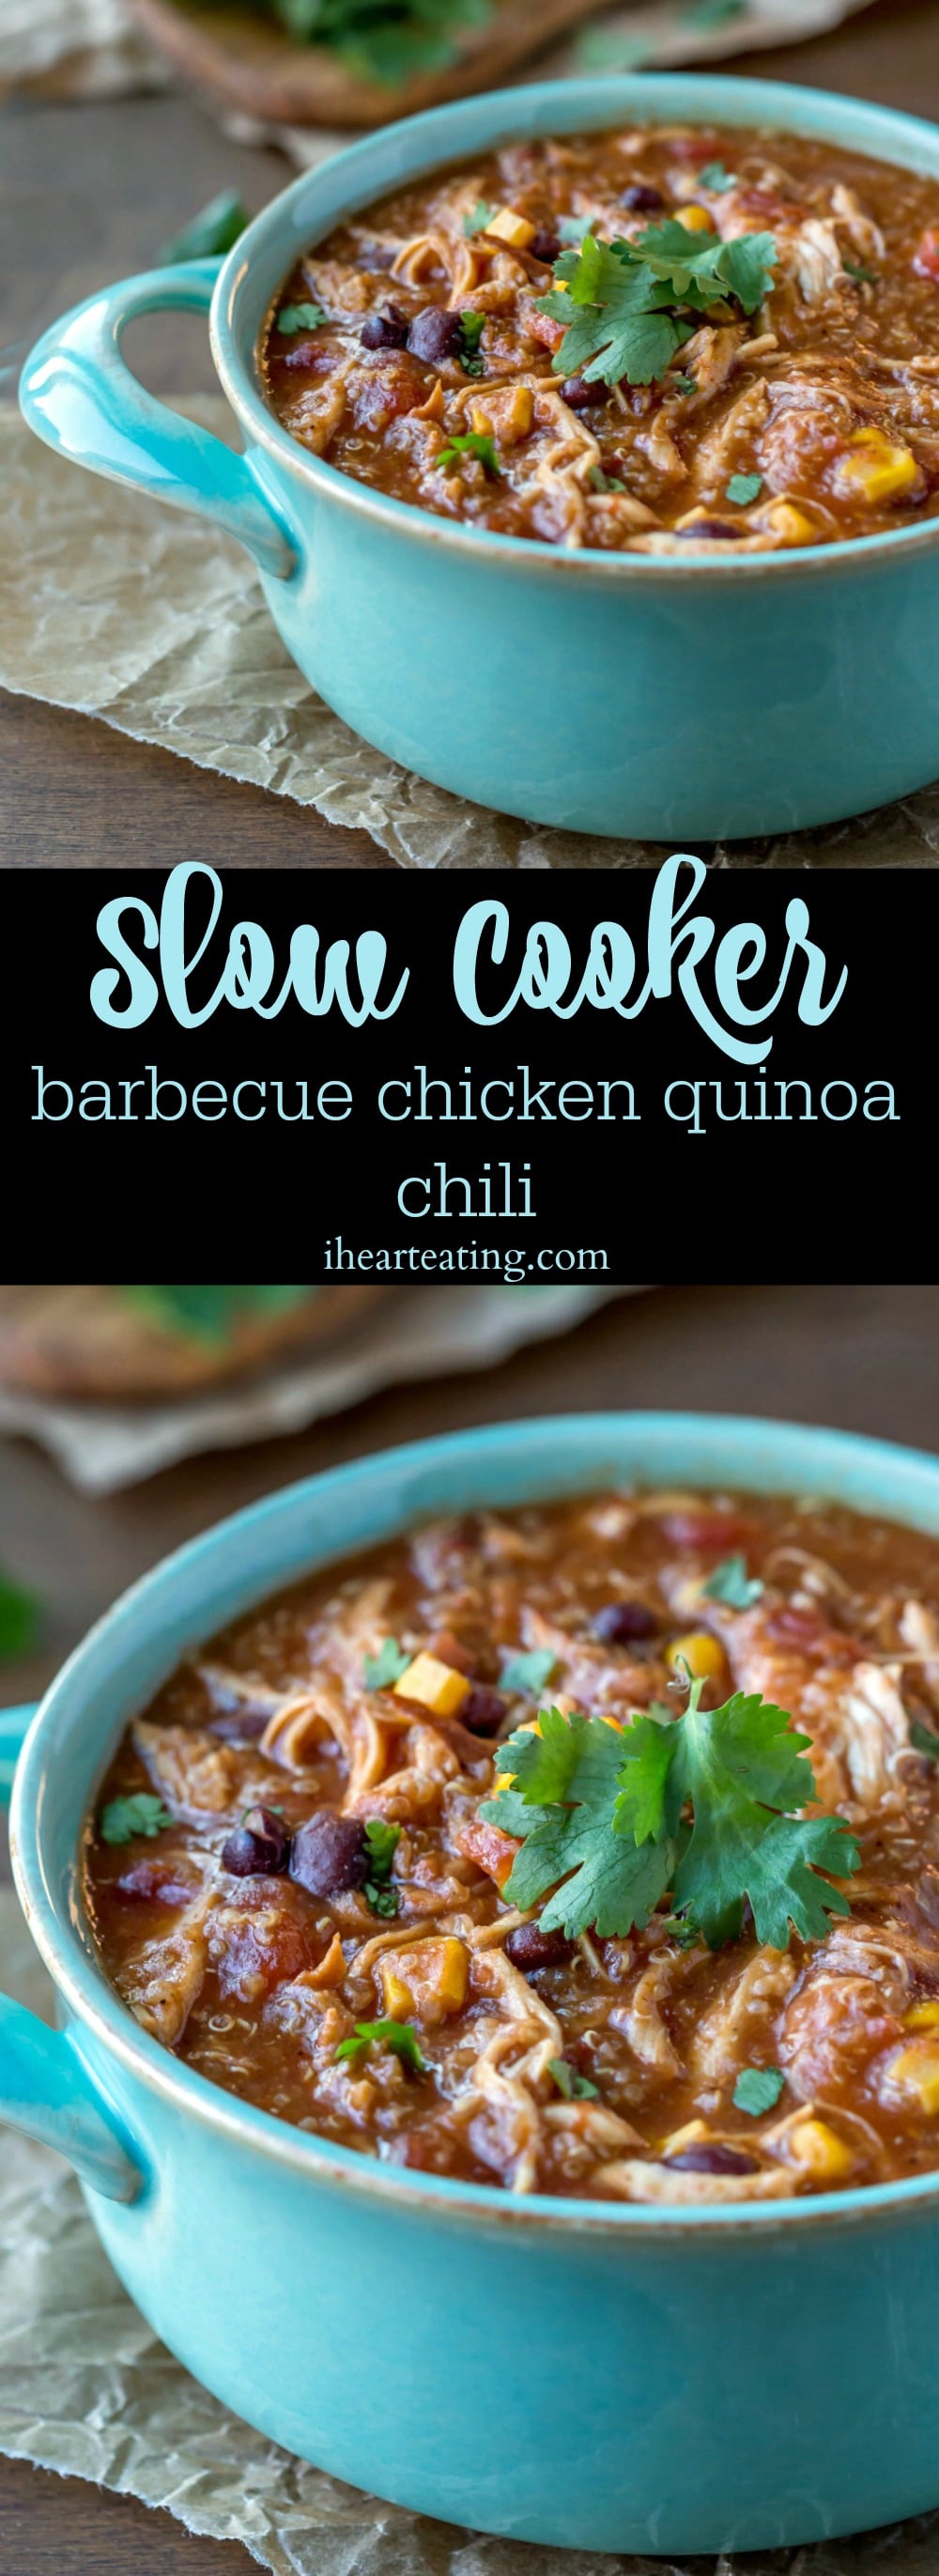 Slow Cooker Barbecue Chicken Quinoa Chili - I Heart Eating